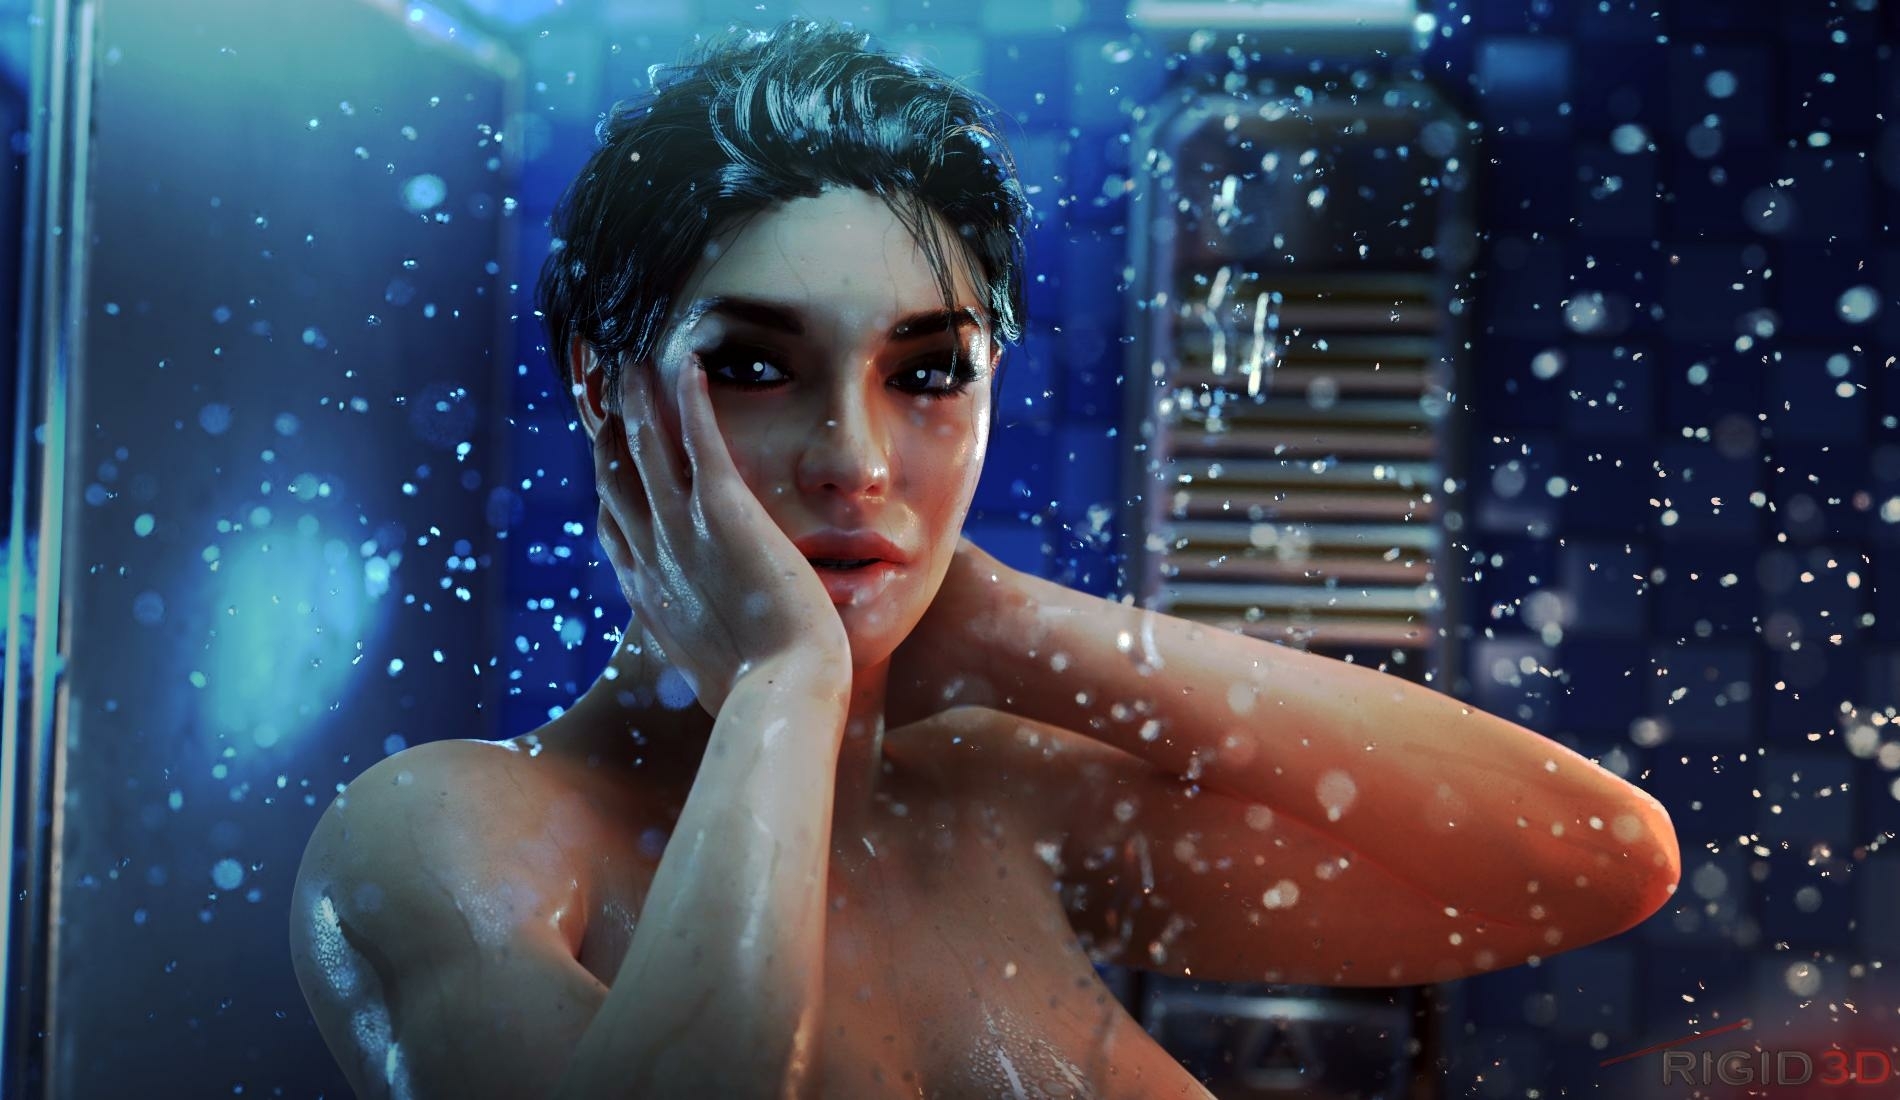 Ashley in the shower. Ashley Williams Mass Effect Ass Big Ass Naked Big Tits Tits Sexy Horny Face 3d Porn 2